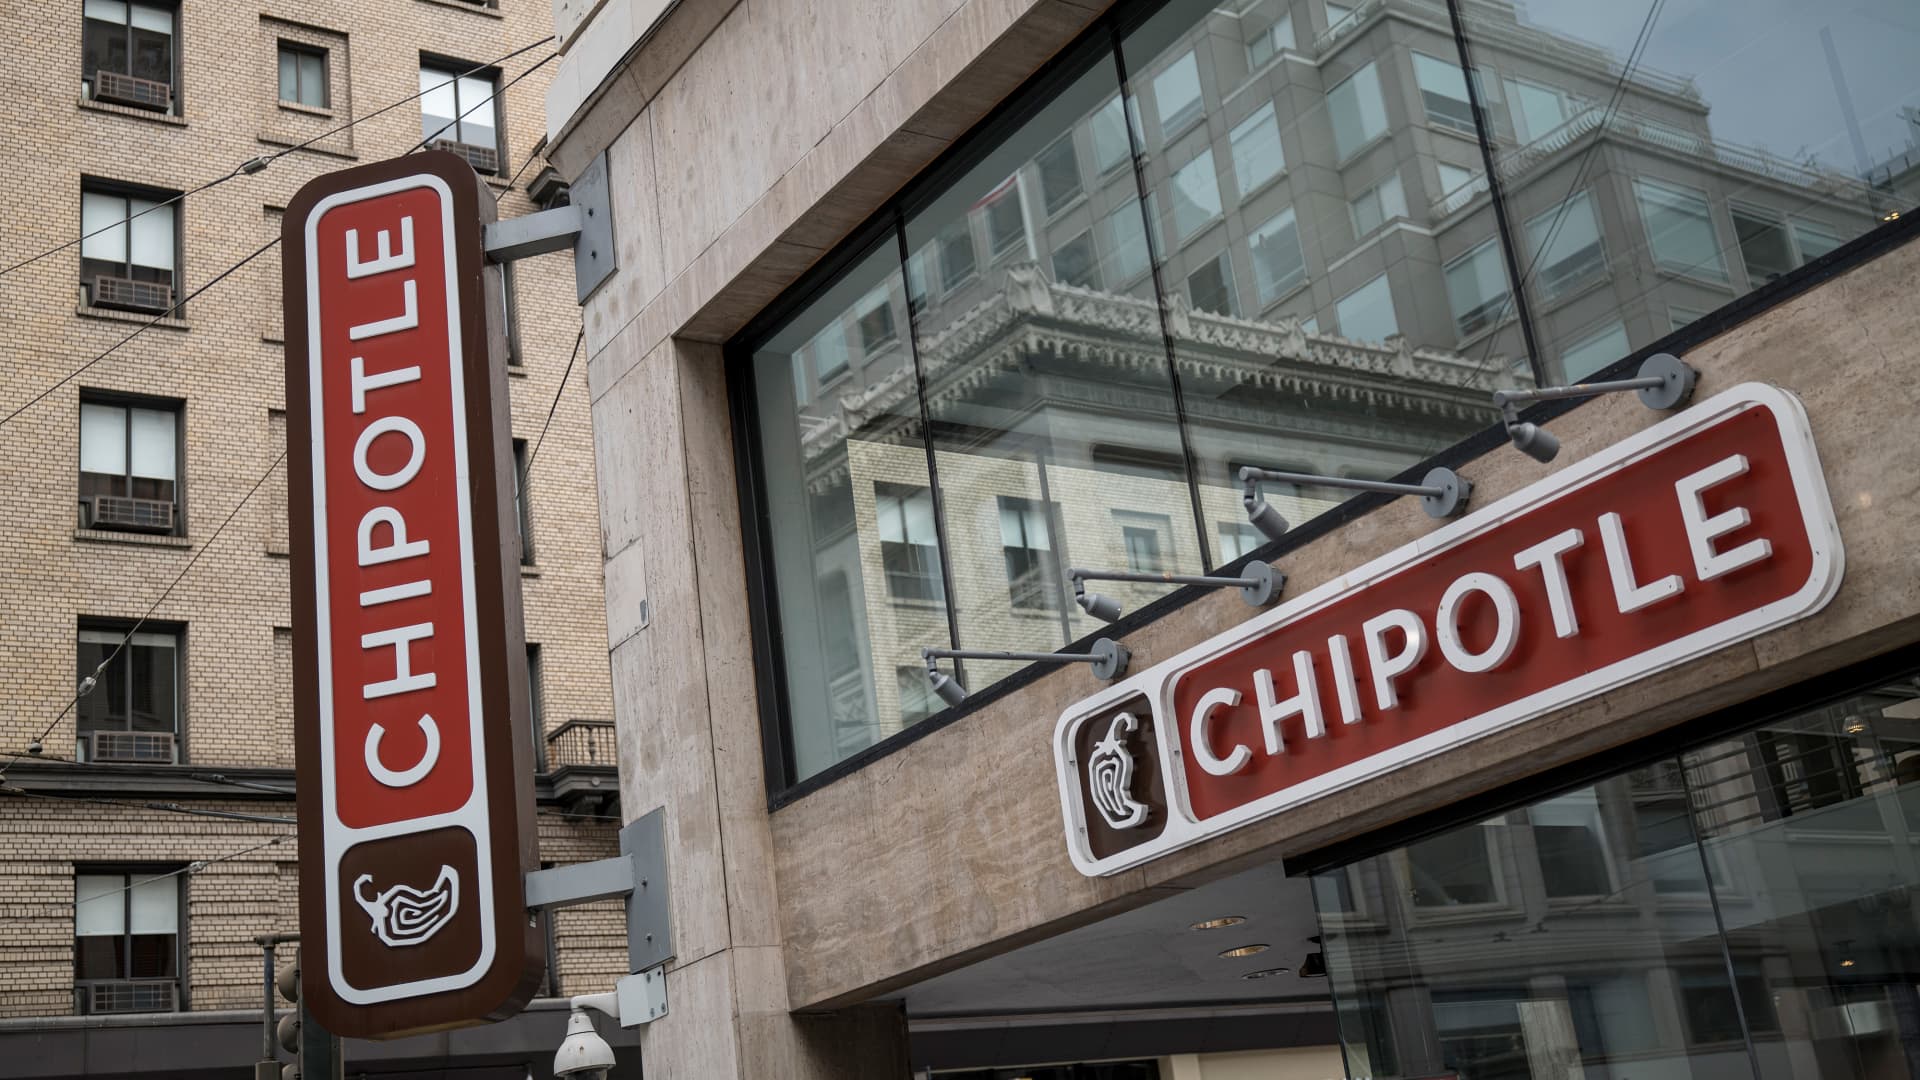 Signage is displayed outside a Chipotle Mexican Grill Inc. restaurant in San Francisco, California, U.S., on Monday, July 20, 2020. Chipotle is scheduled to release earnings figures on July 22.